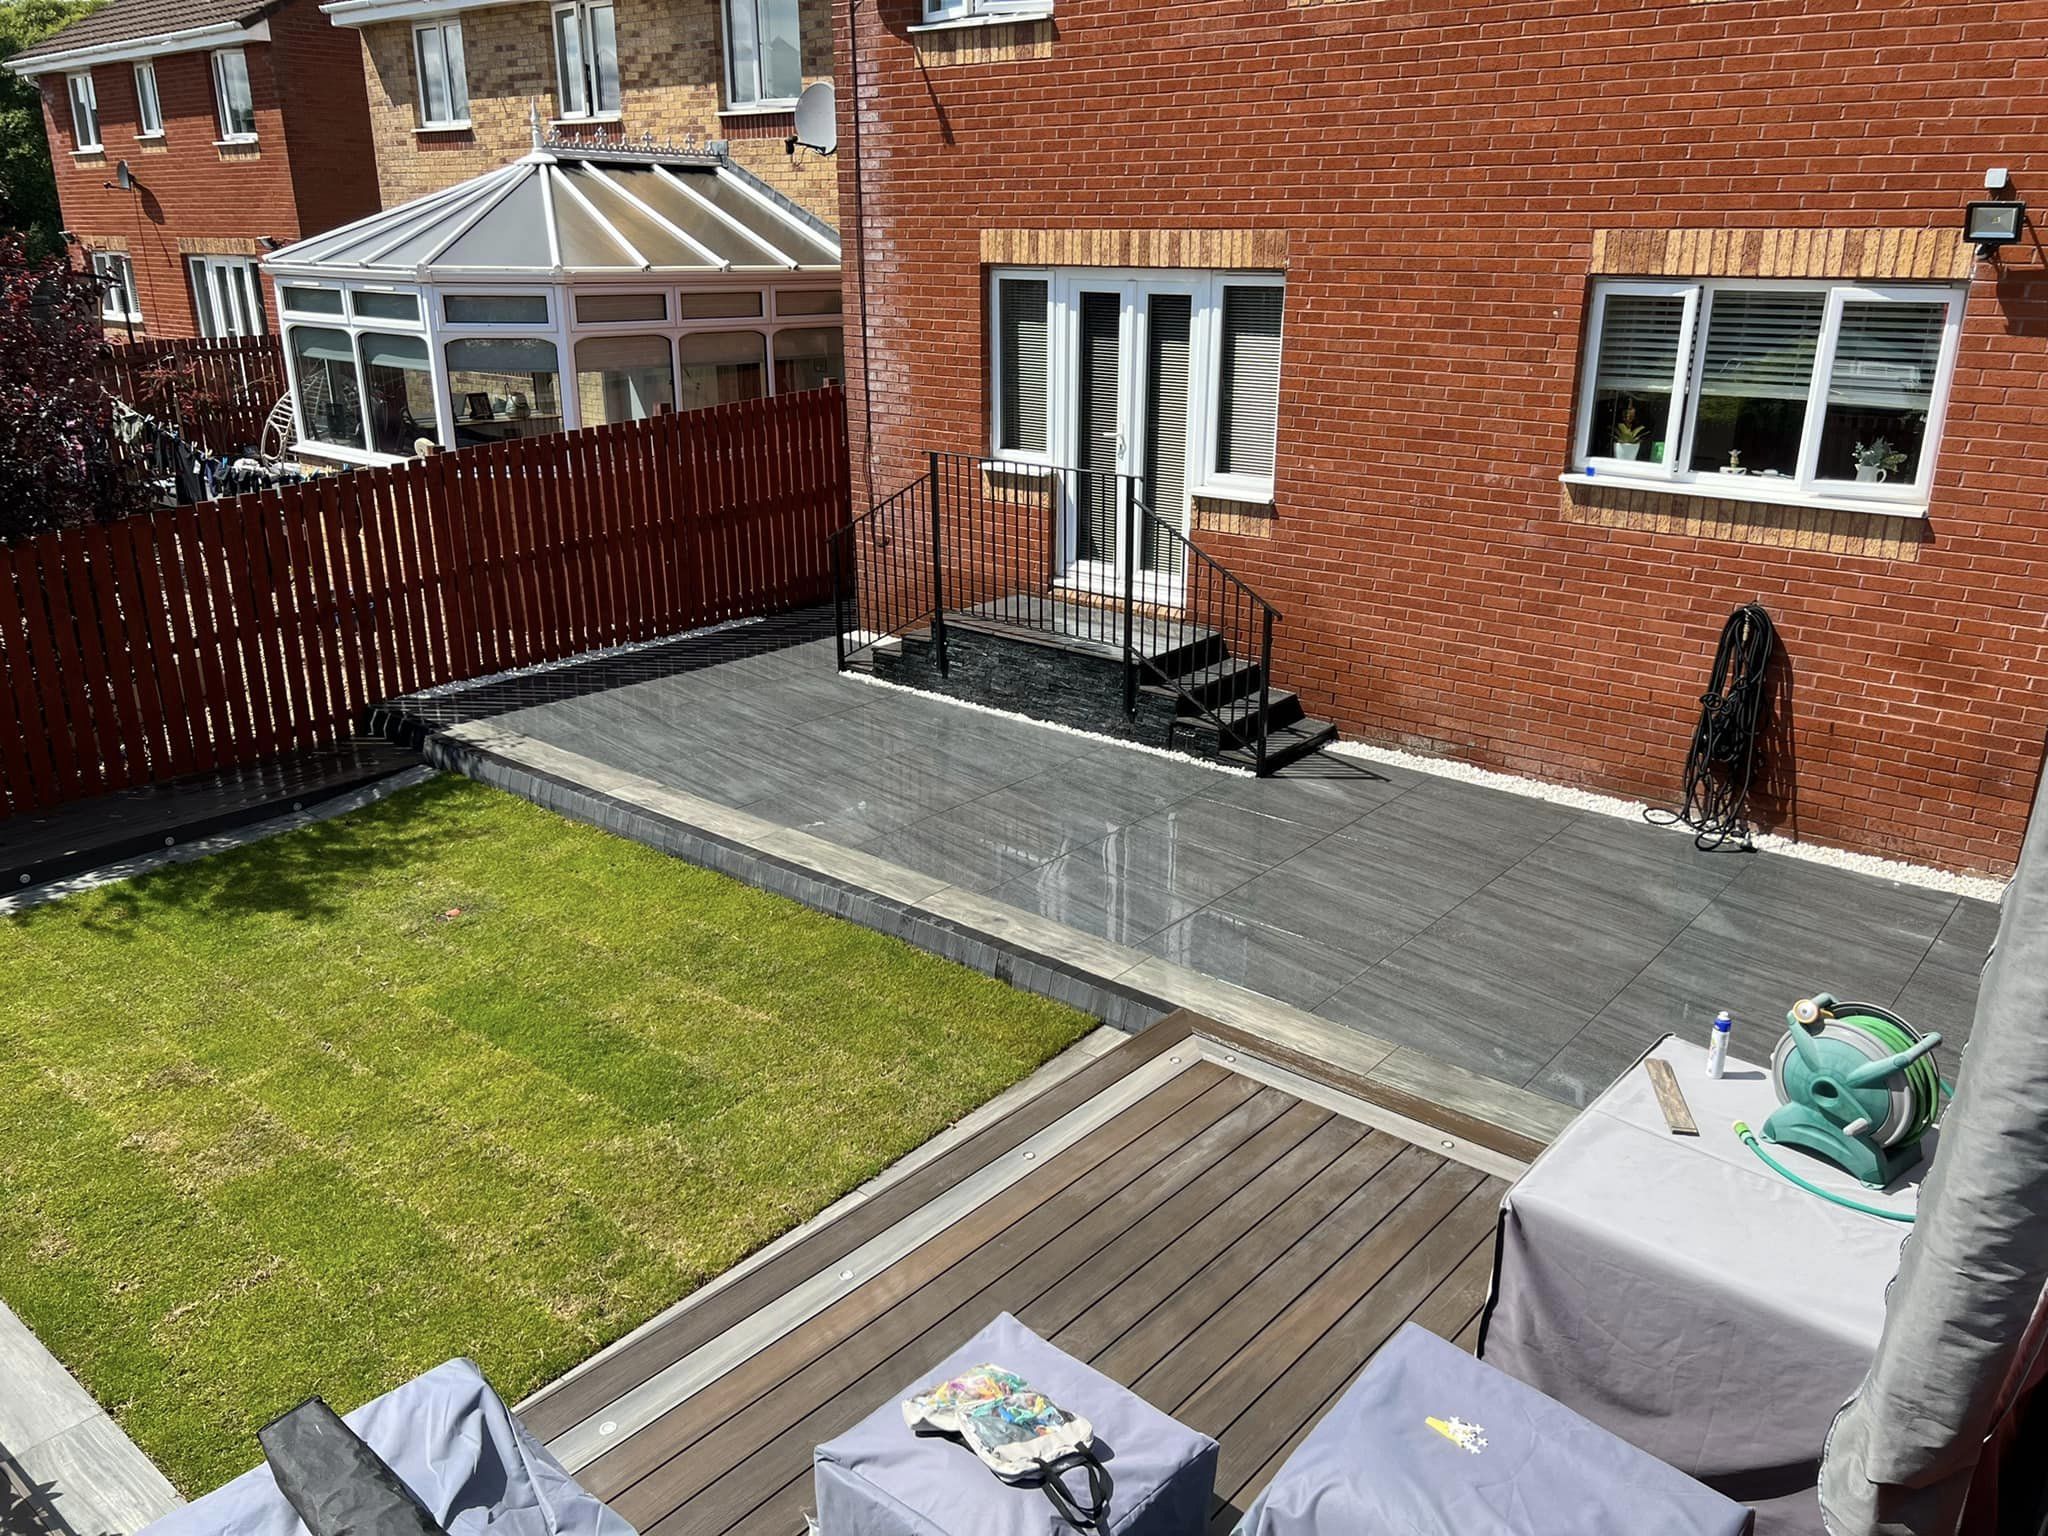 Patio, lawn and decking areas Glasgow